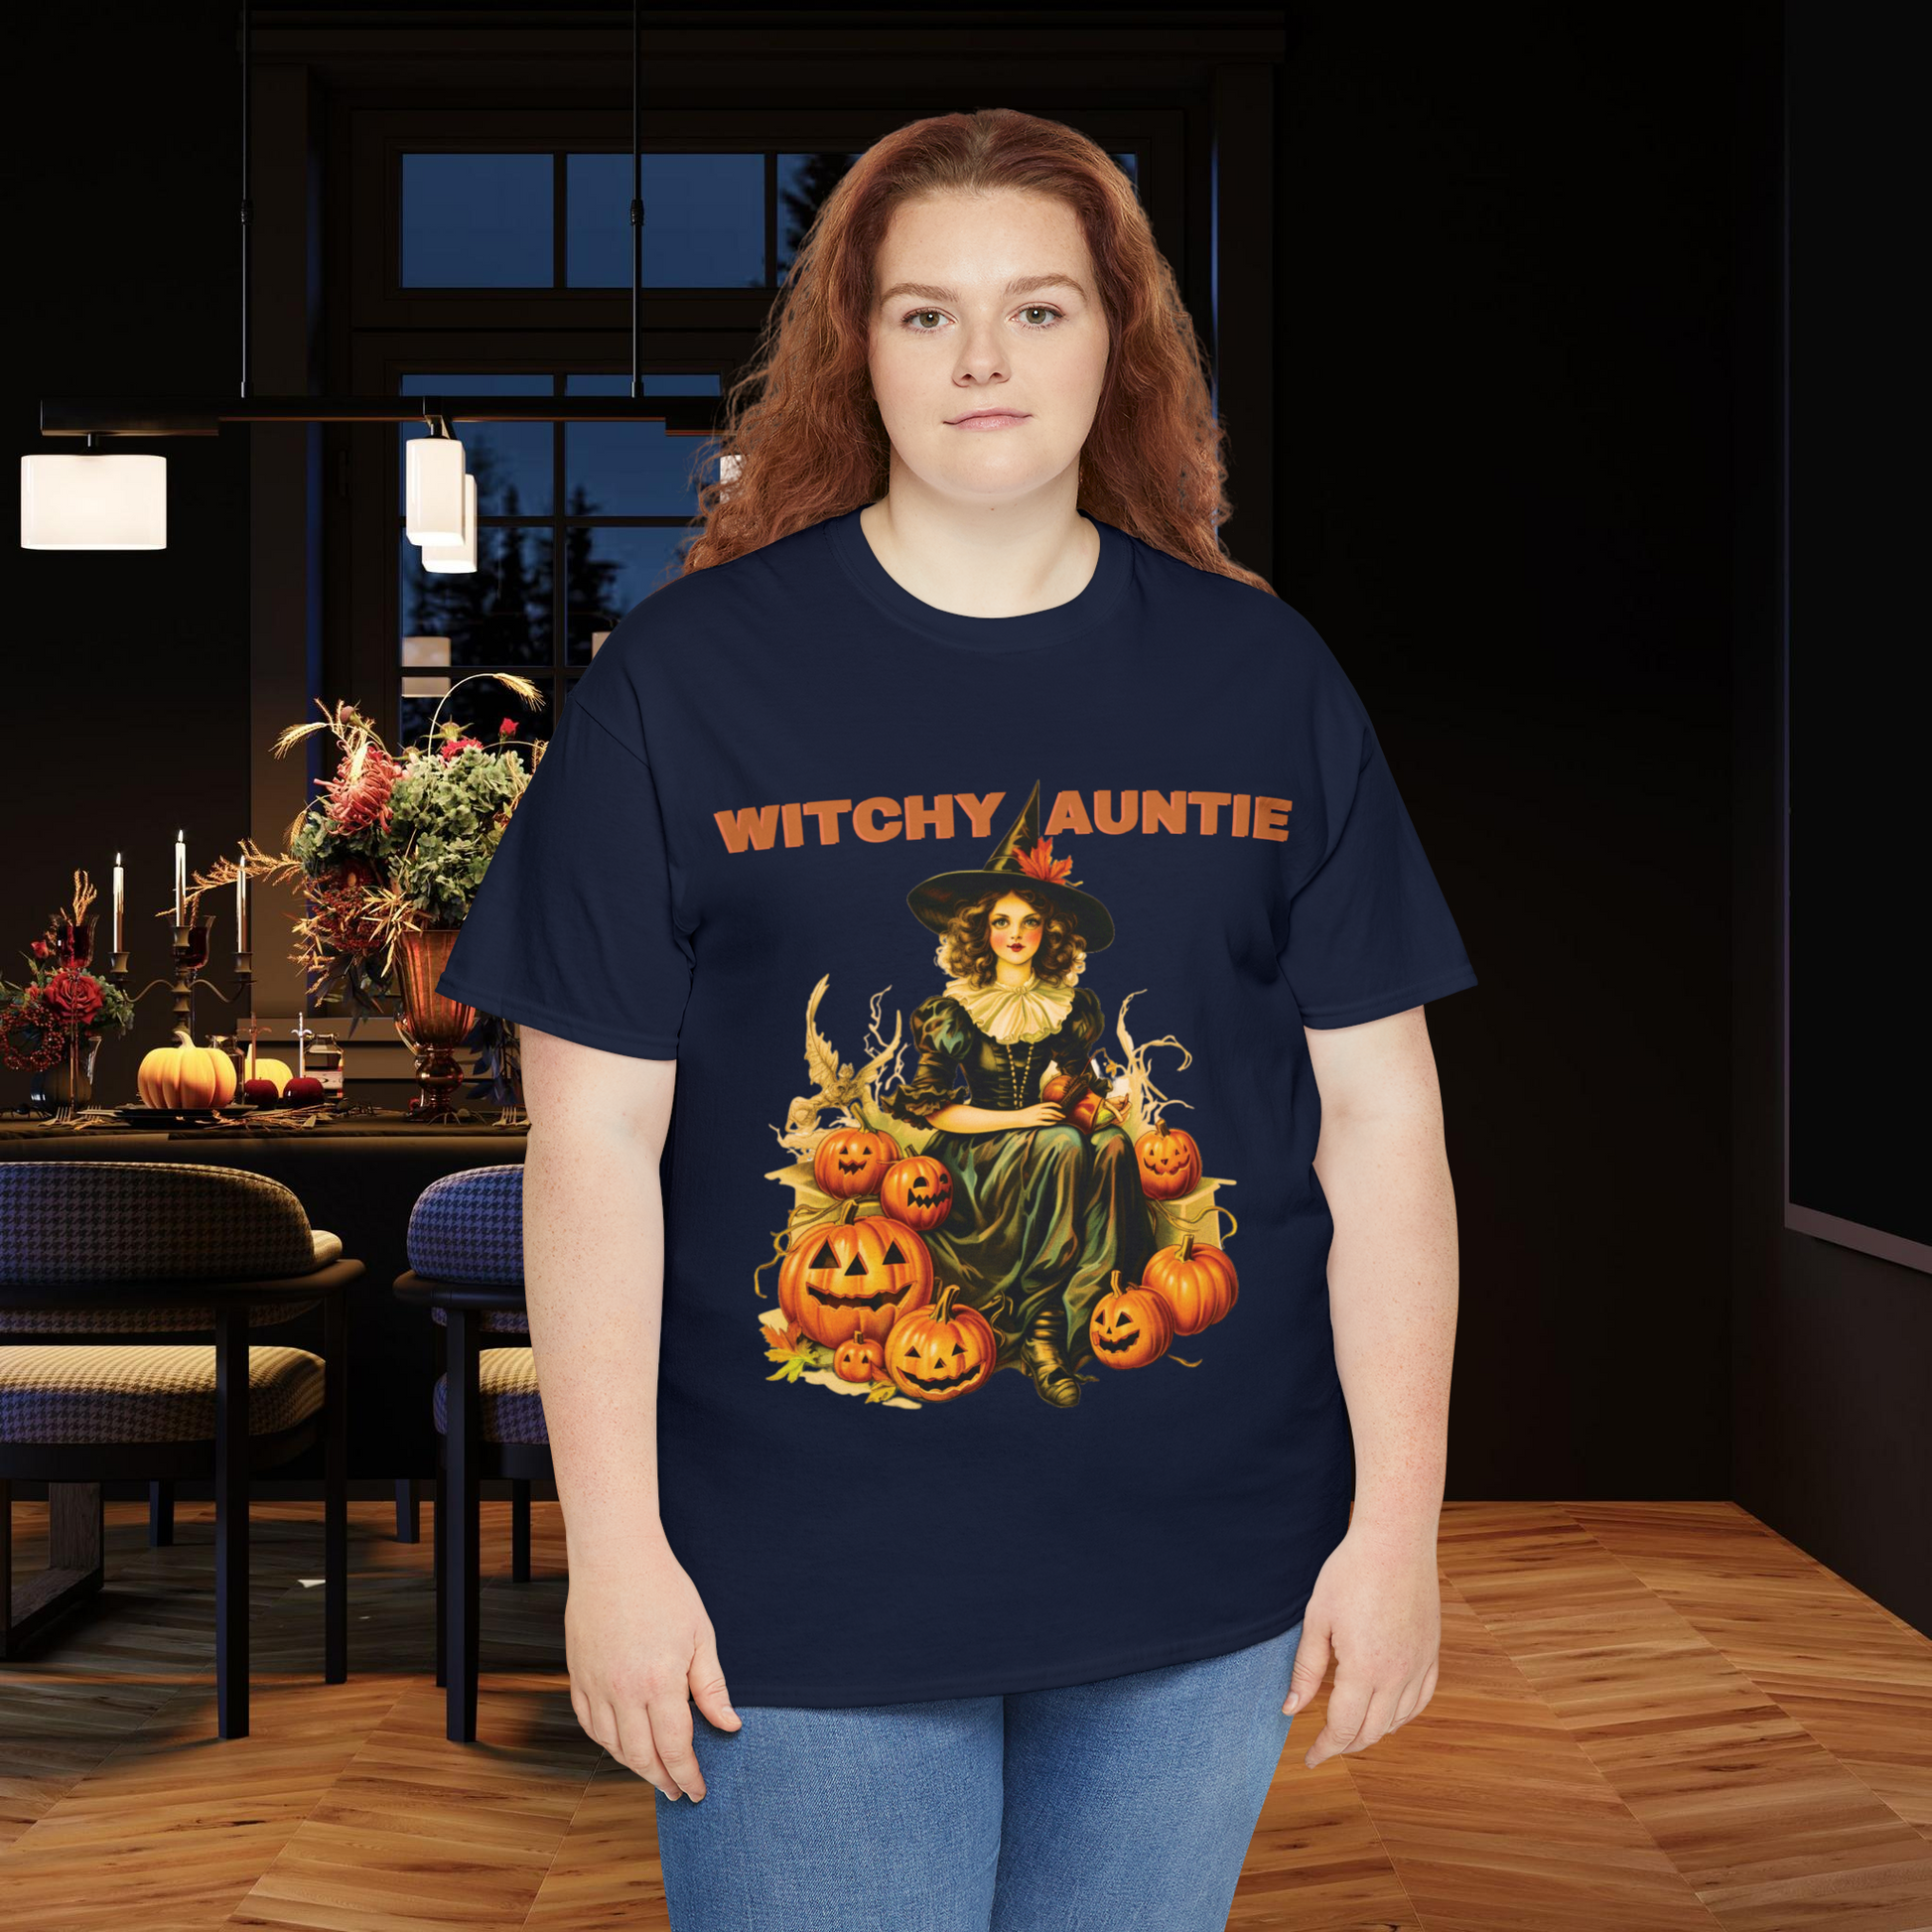 Witchy Auntie Cotton T-Shirt - Cool Aunt, Aunt Halloween, Perfect Gift for Aunts T-Shirt   